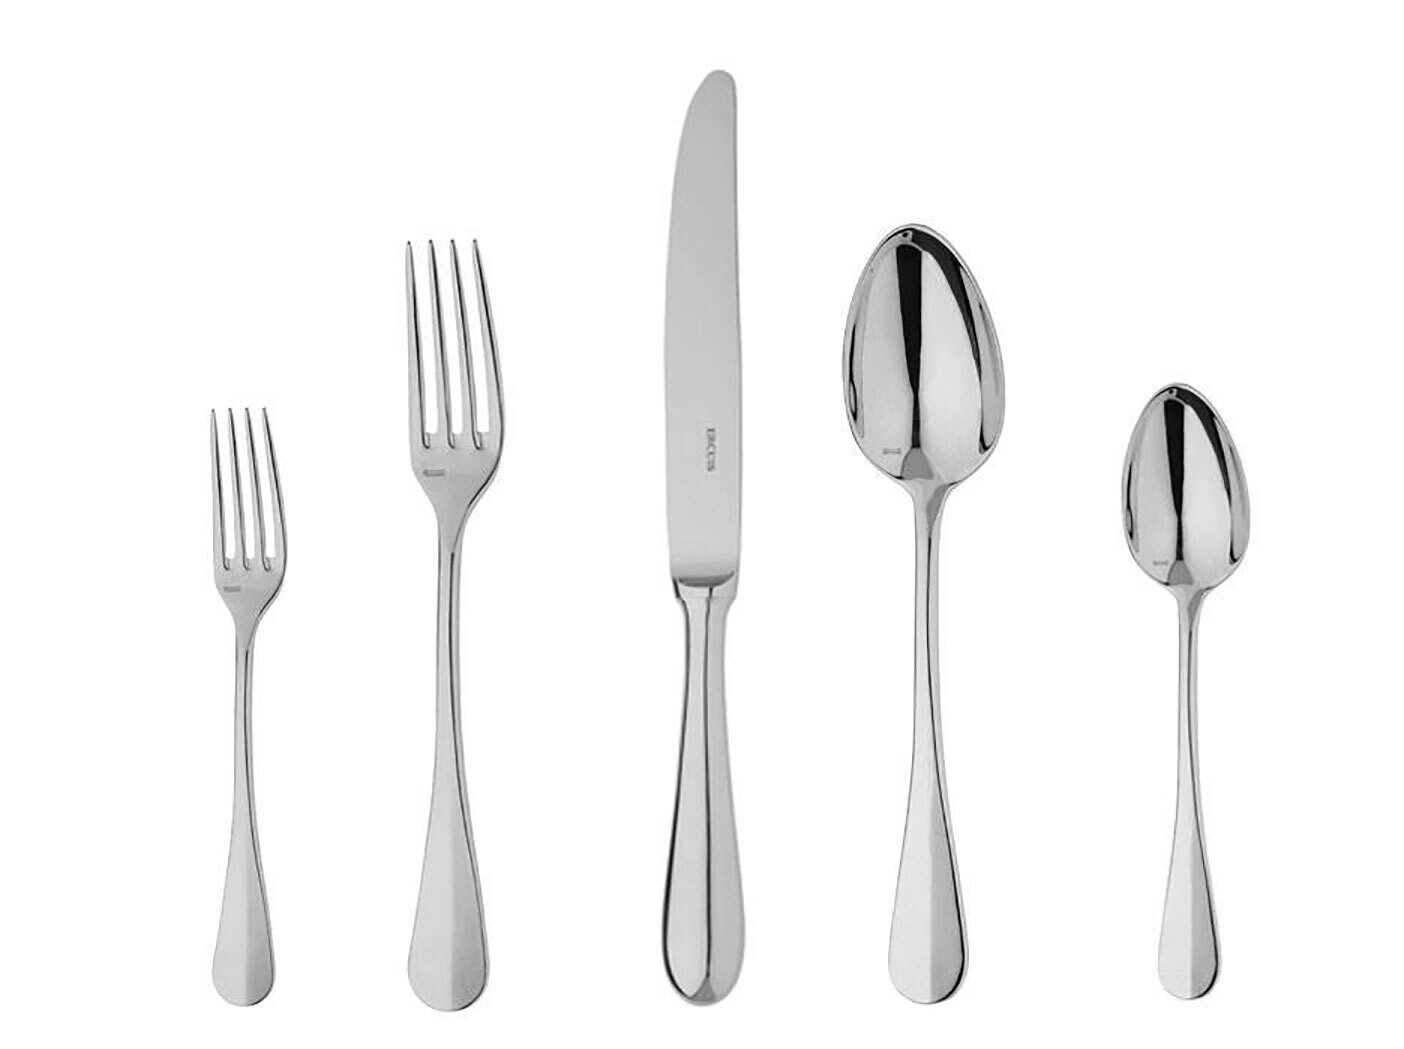 Ercuis Bali 5 Piece Place Setting with Anti-Tarnish Bag Stainless Steel F660010-DC